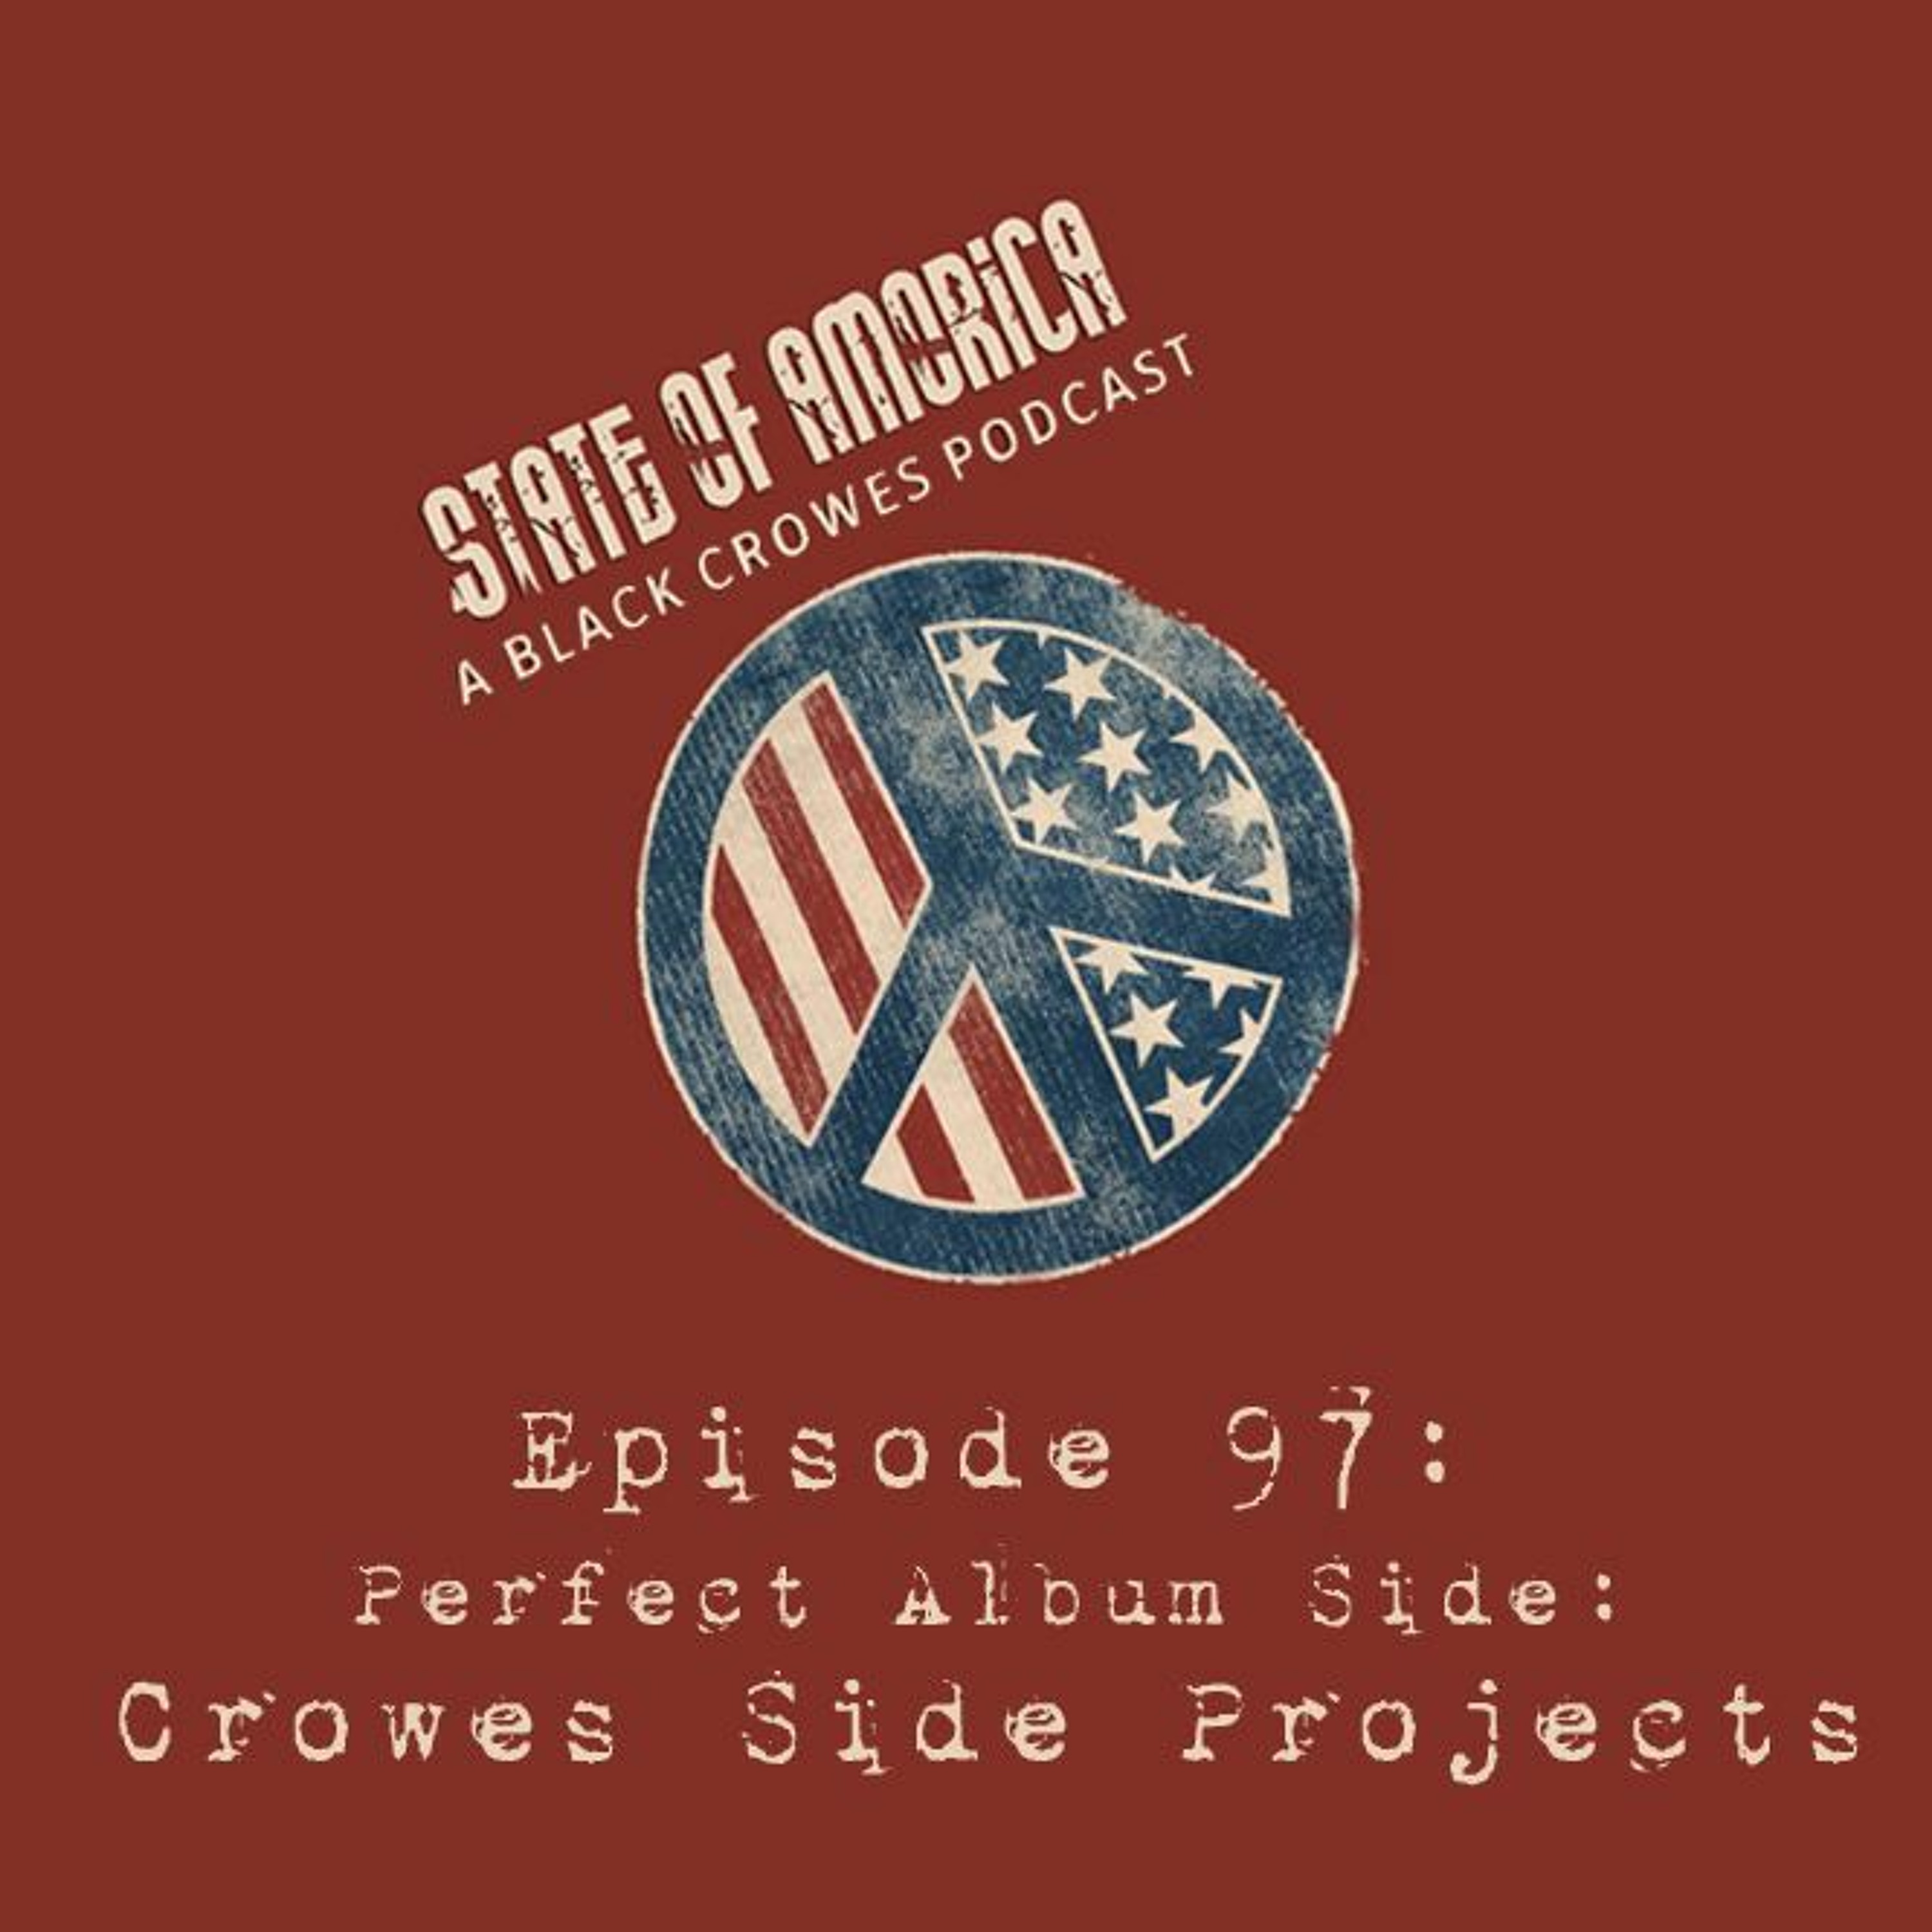 Episode 97: The Perfect Album Side - Crowes Side Projects